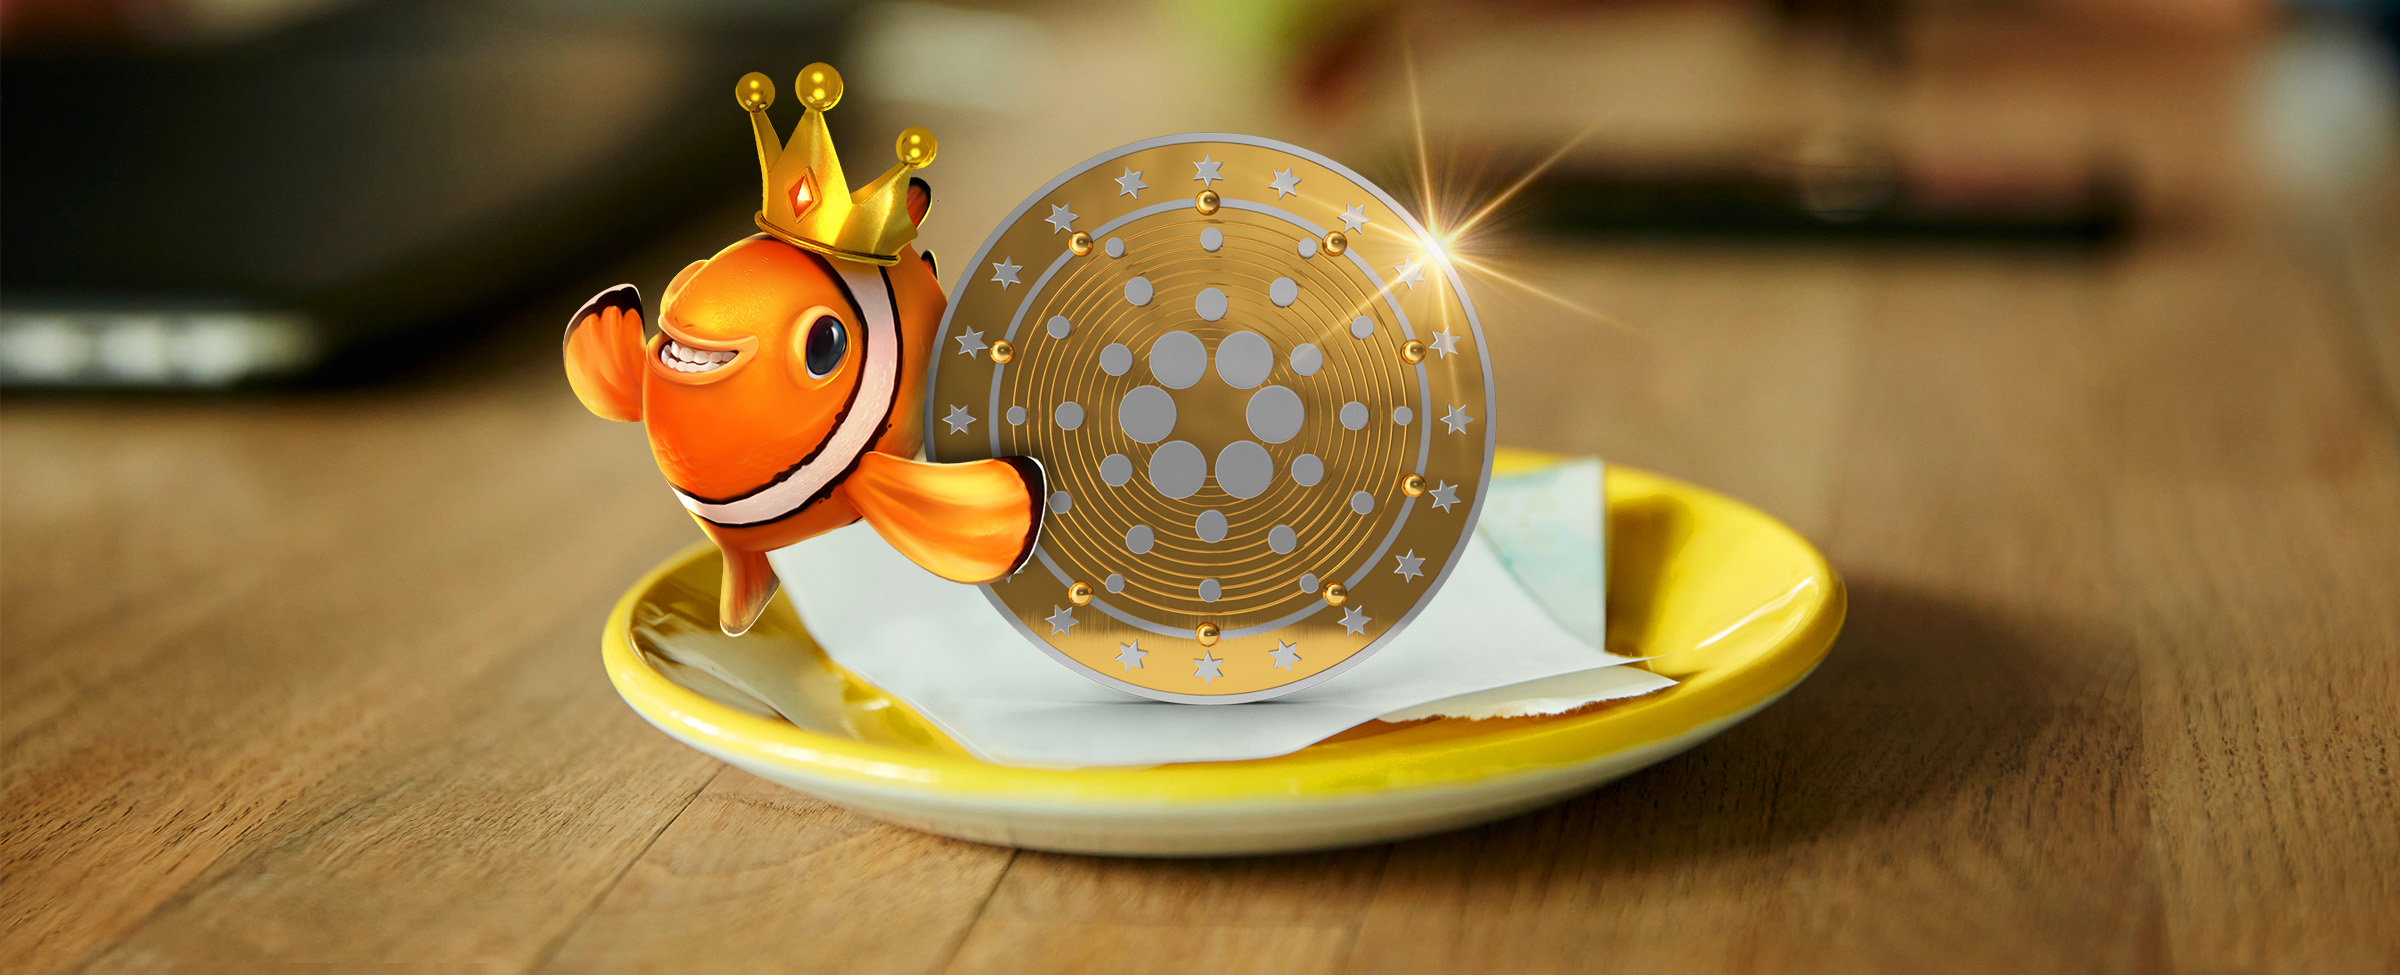 A 3D-animated bright orange goldfish wearing a gold crown swims past a crypto coin, which is delicately balanced on top of a docket, laid flat on a yellow saucer that sits on a cafe bench.